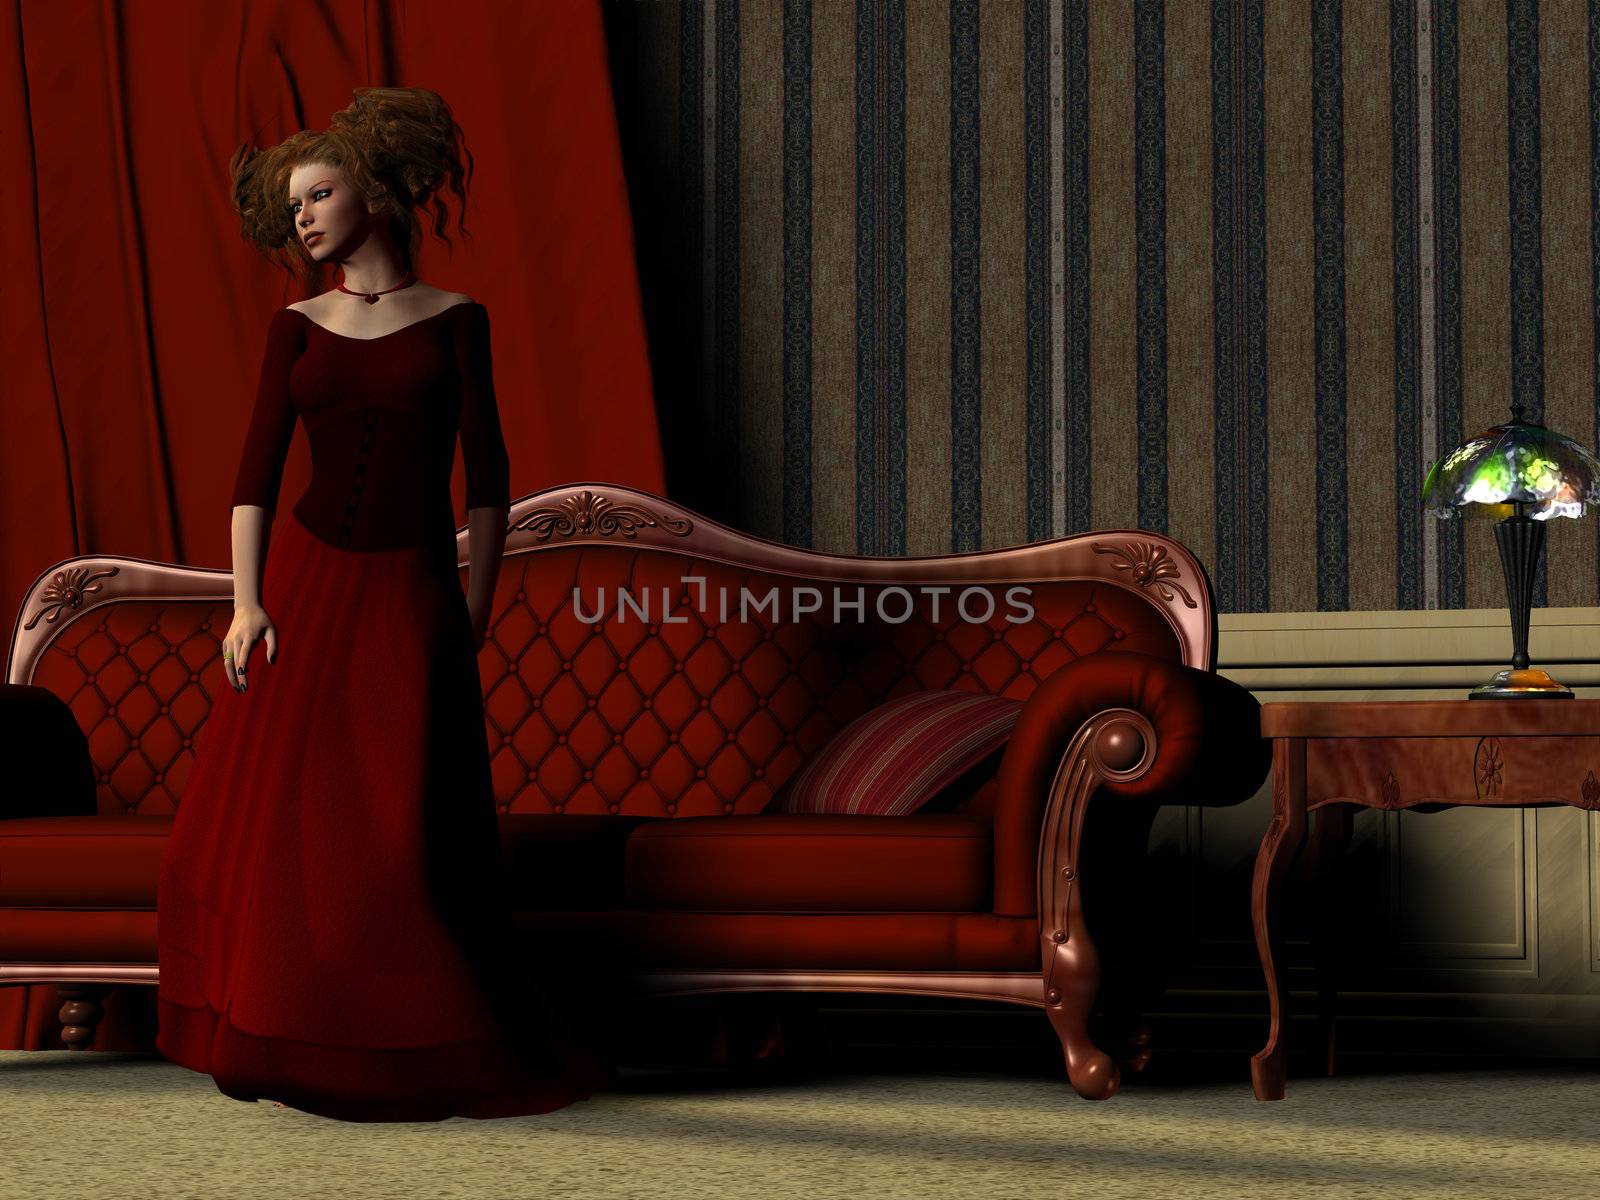 Lady in Red by Catmando